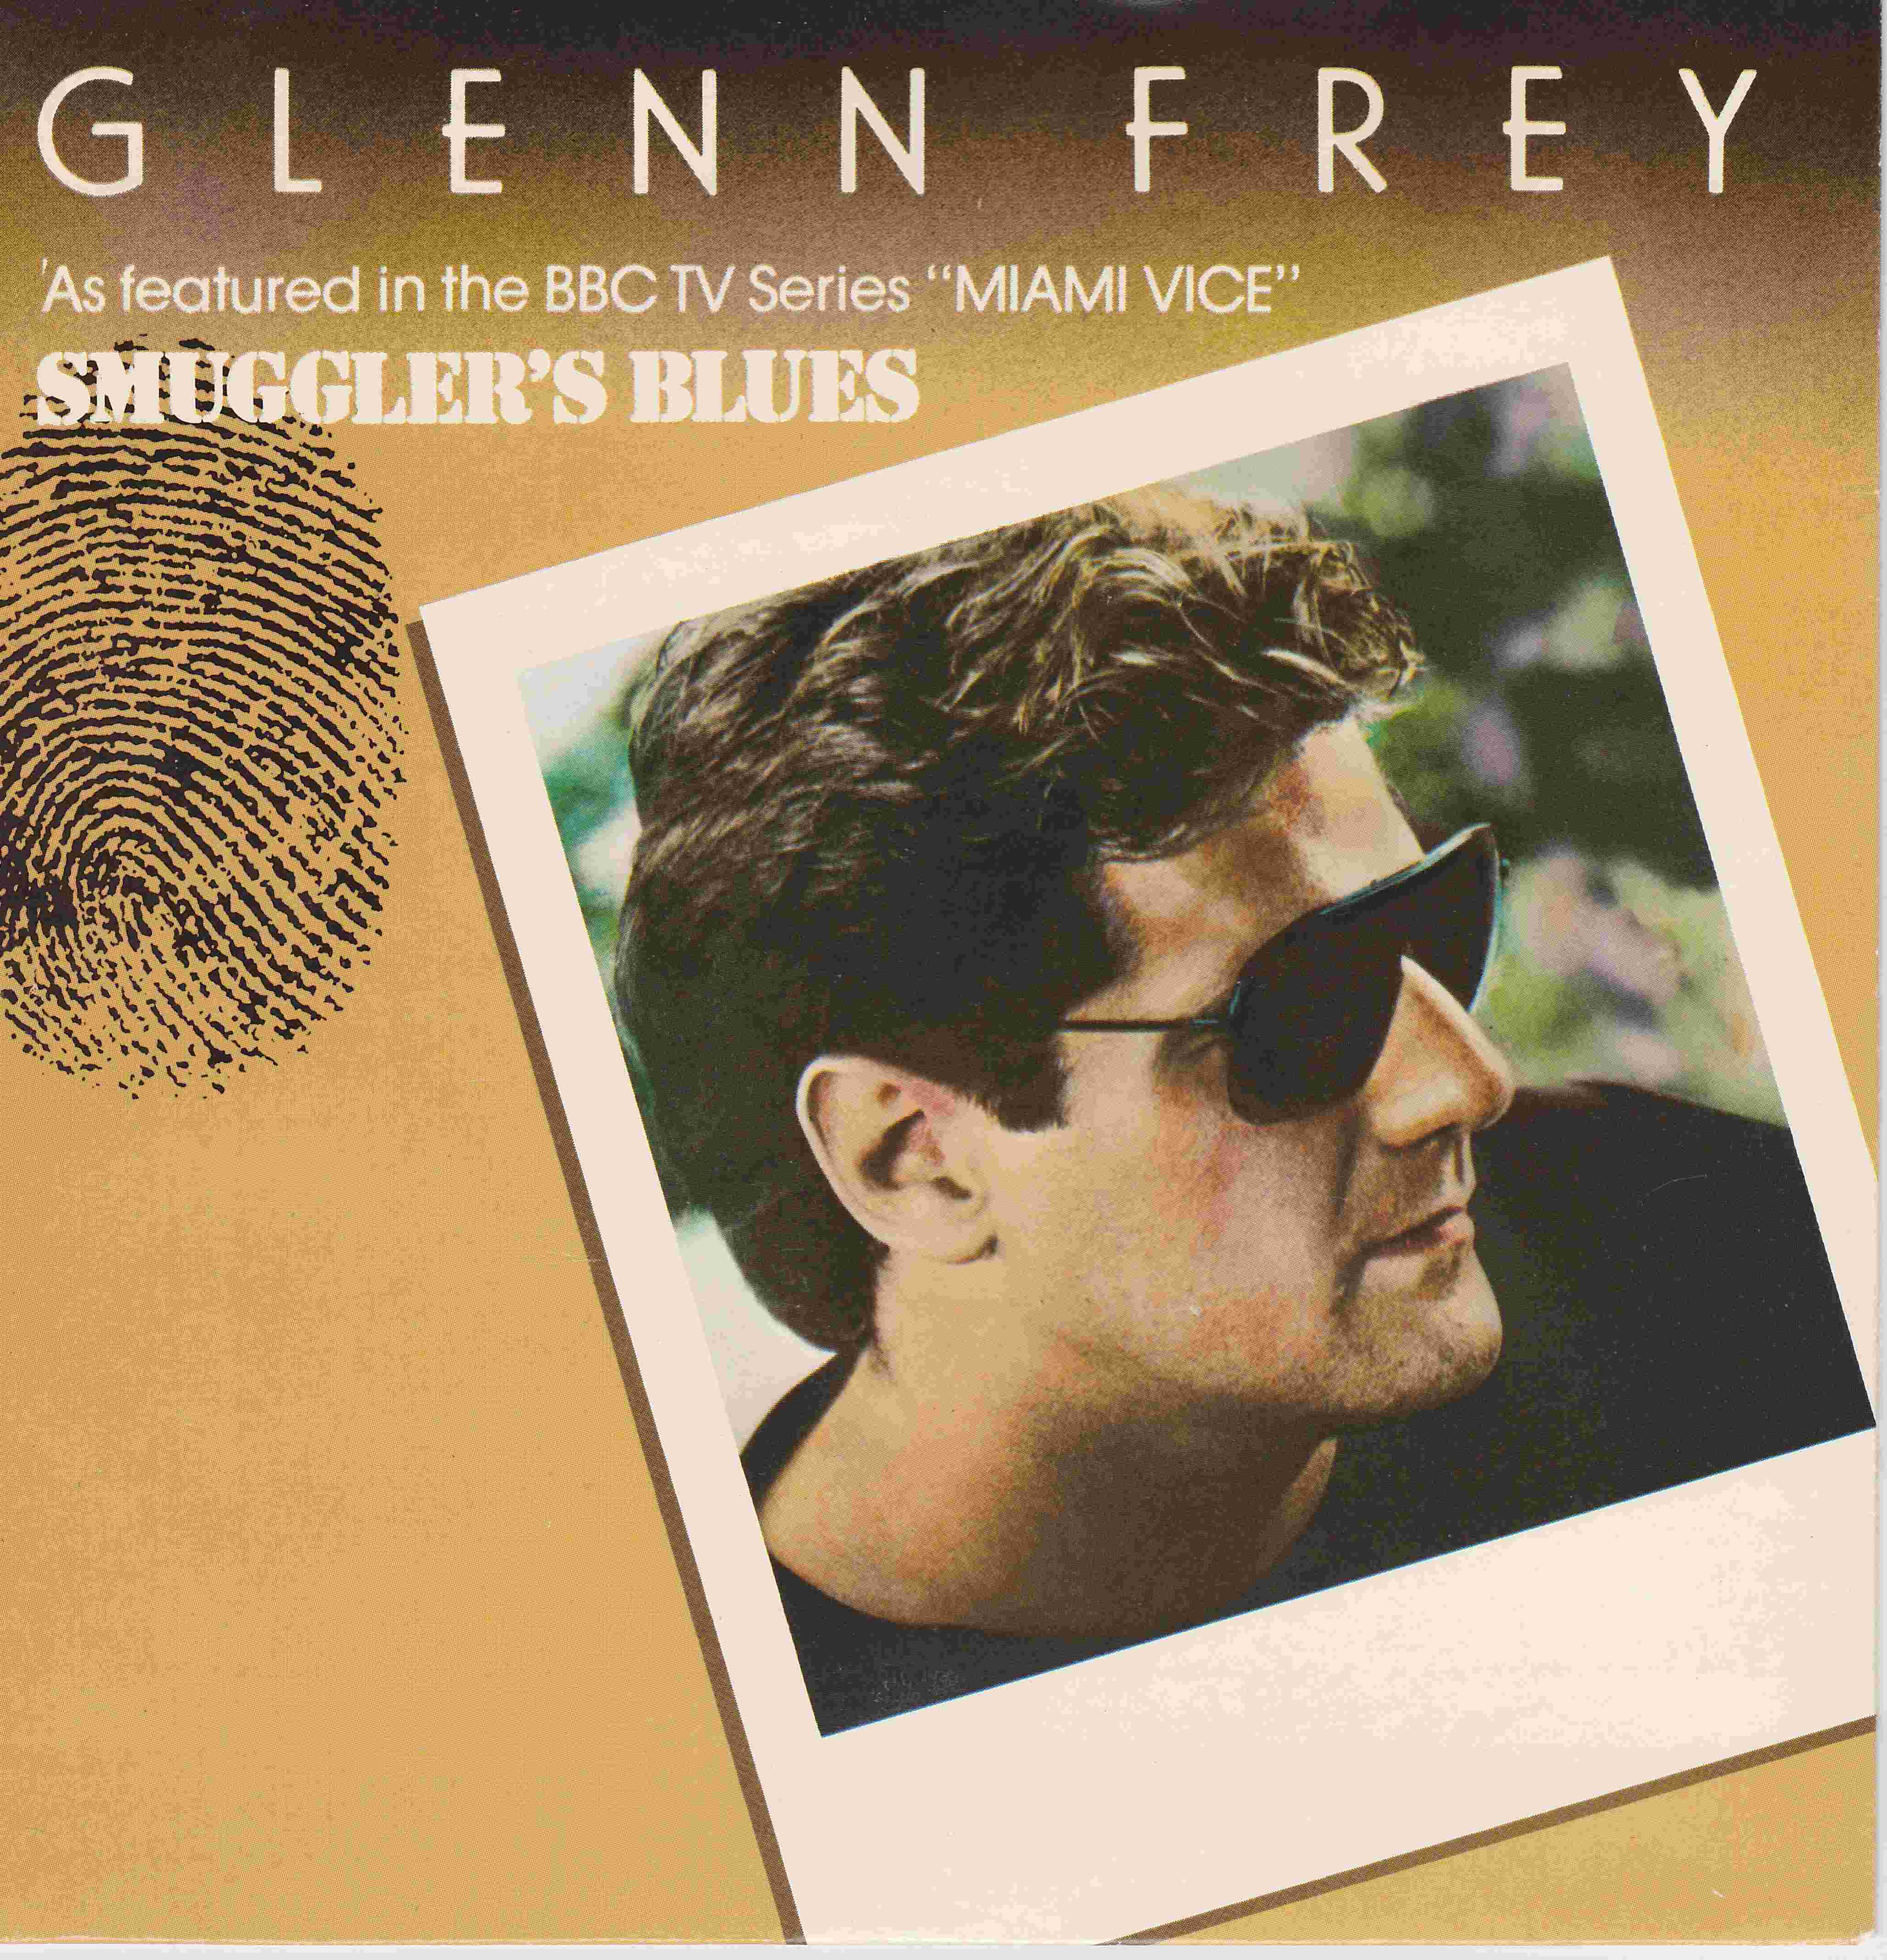 Picture of RESL 170 Smuggler's blues (Miami Vice) by artist Glenn Frey / Jack Tempchin from the BBC records and Tapes library